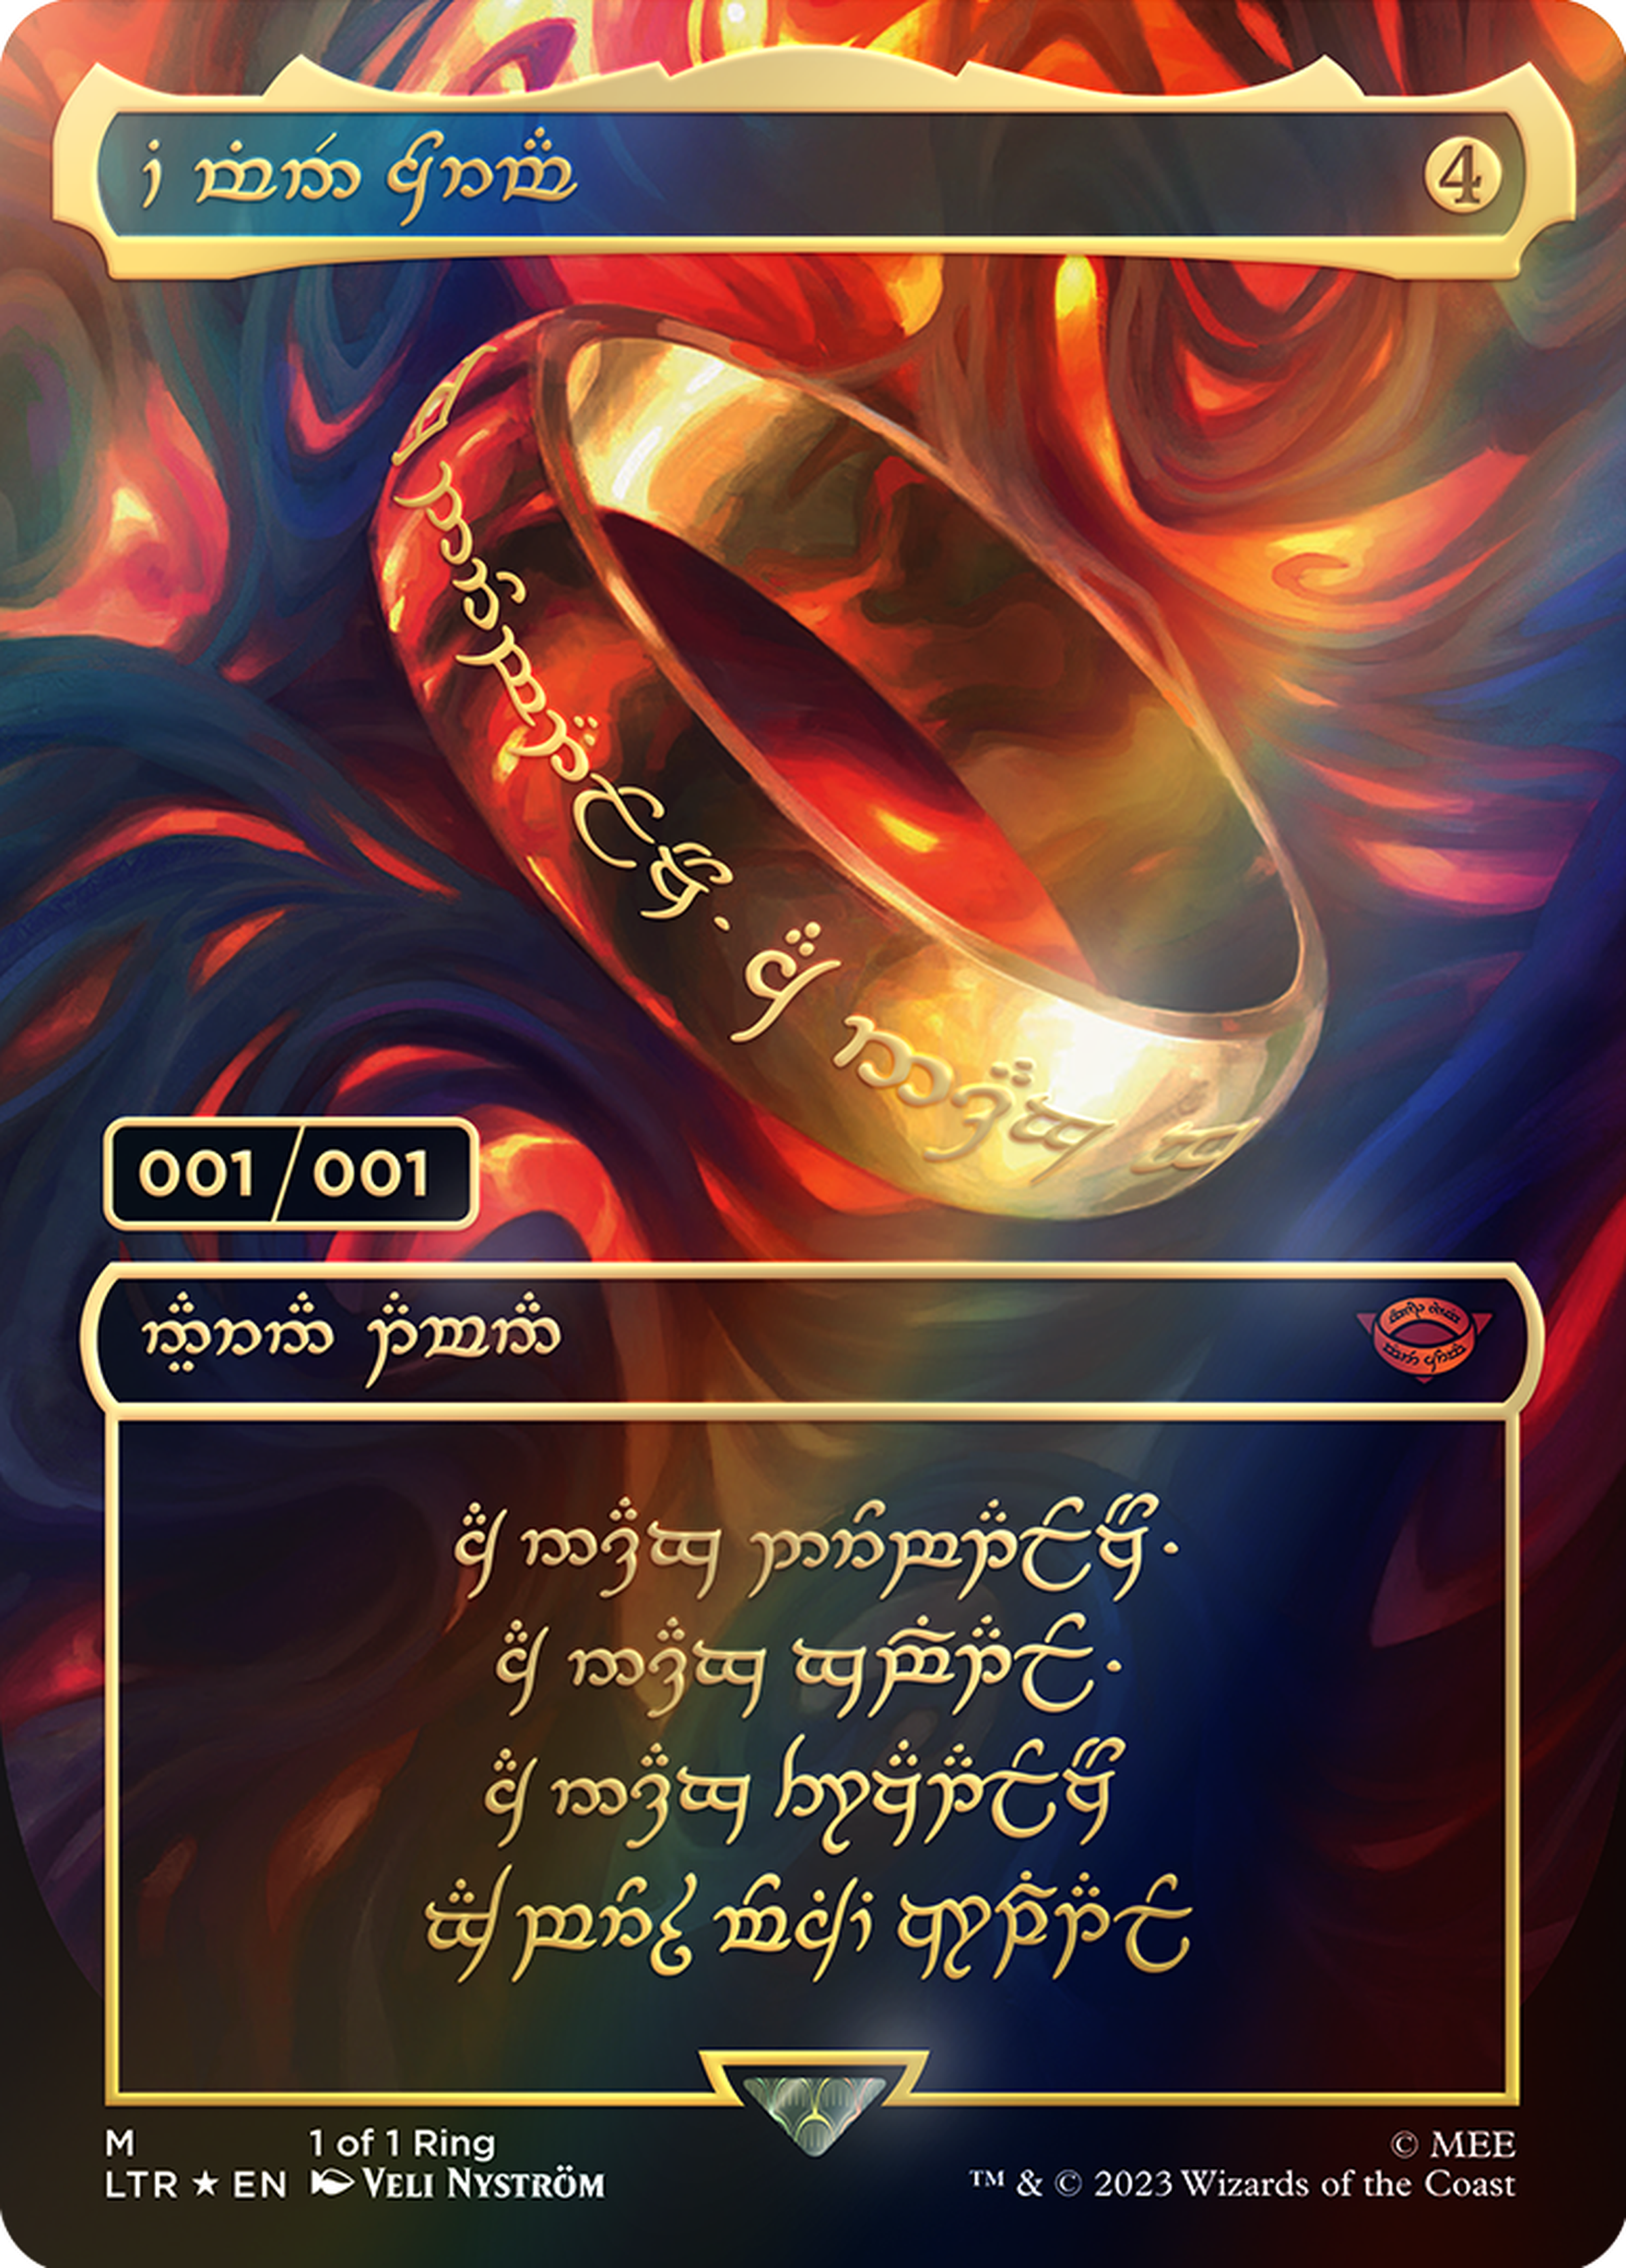 Image of Magic the Gathering card The One Ring featuring a golden ring on a black and red background with card text written in Elvish script.